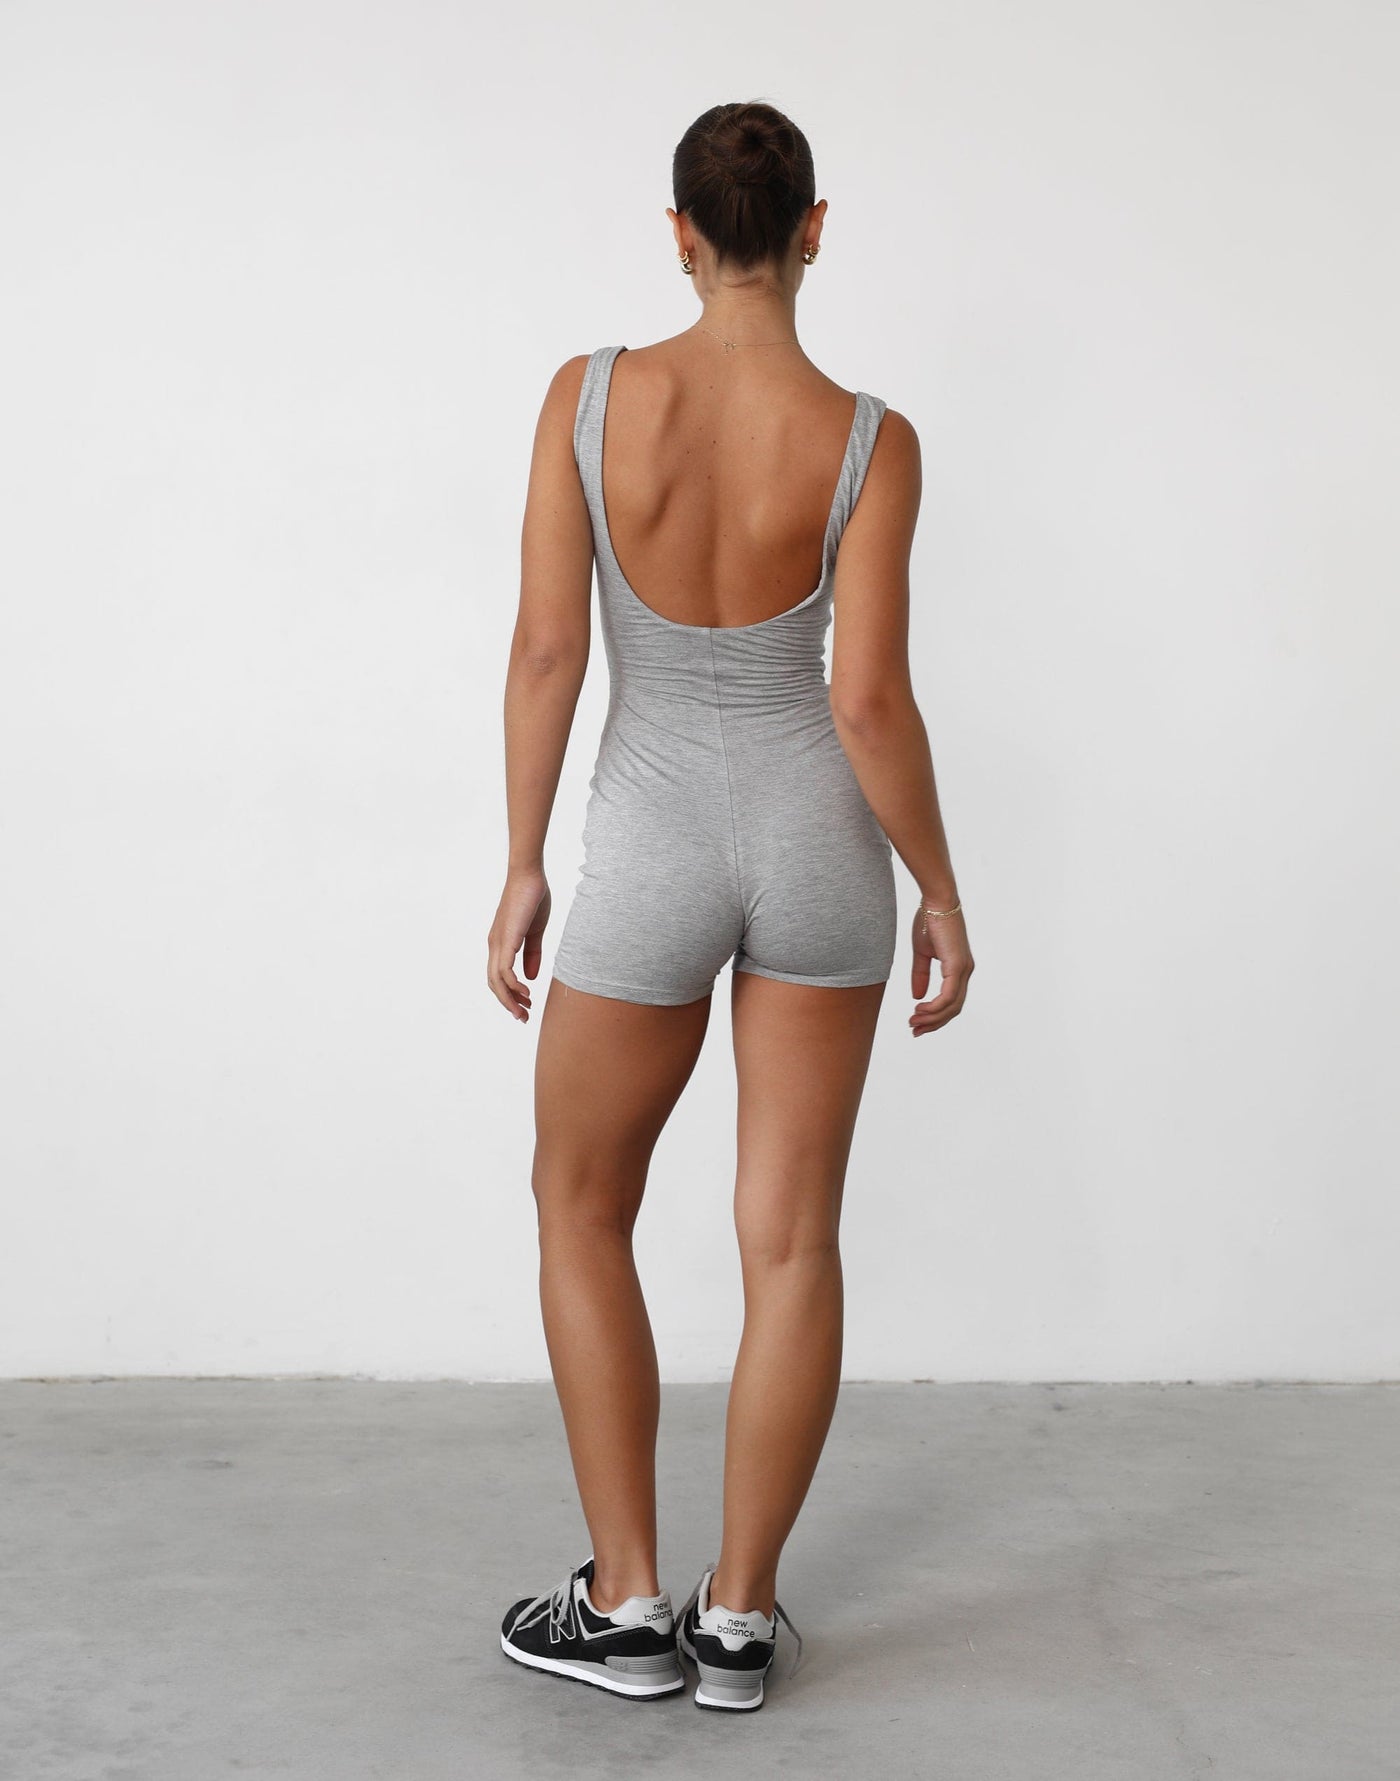 Amazia Playsuit (Grey Marle) - Scoop Neck Low Back Playsuit - Women's Playsuit - Charcoal Clothing